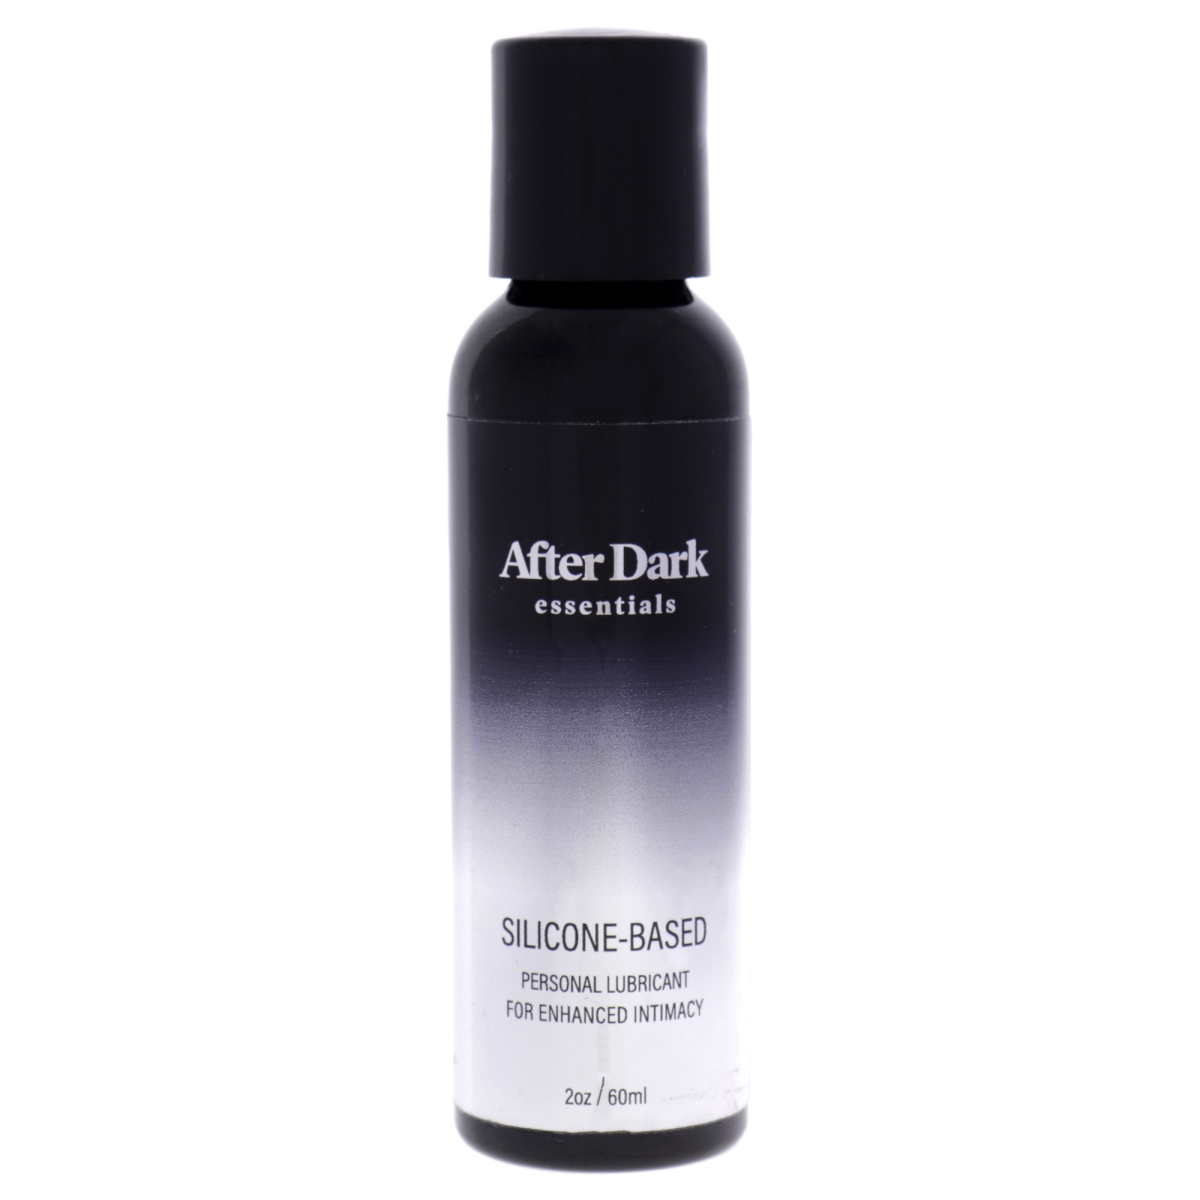 Picture of After Dark Essentials I0113017 2 oz Silicone-Based Personal Lubricant for Unisex